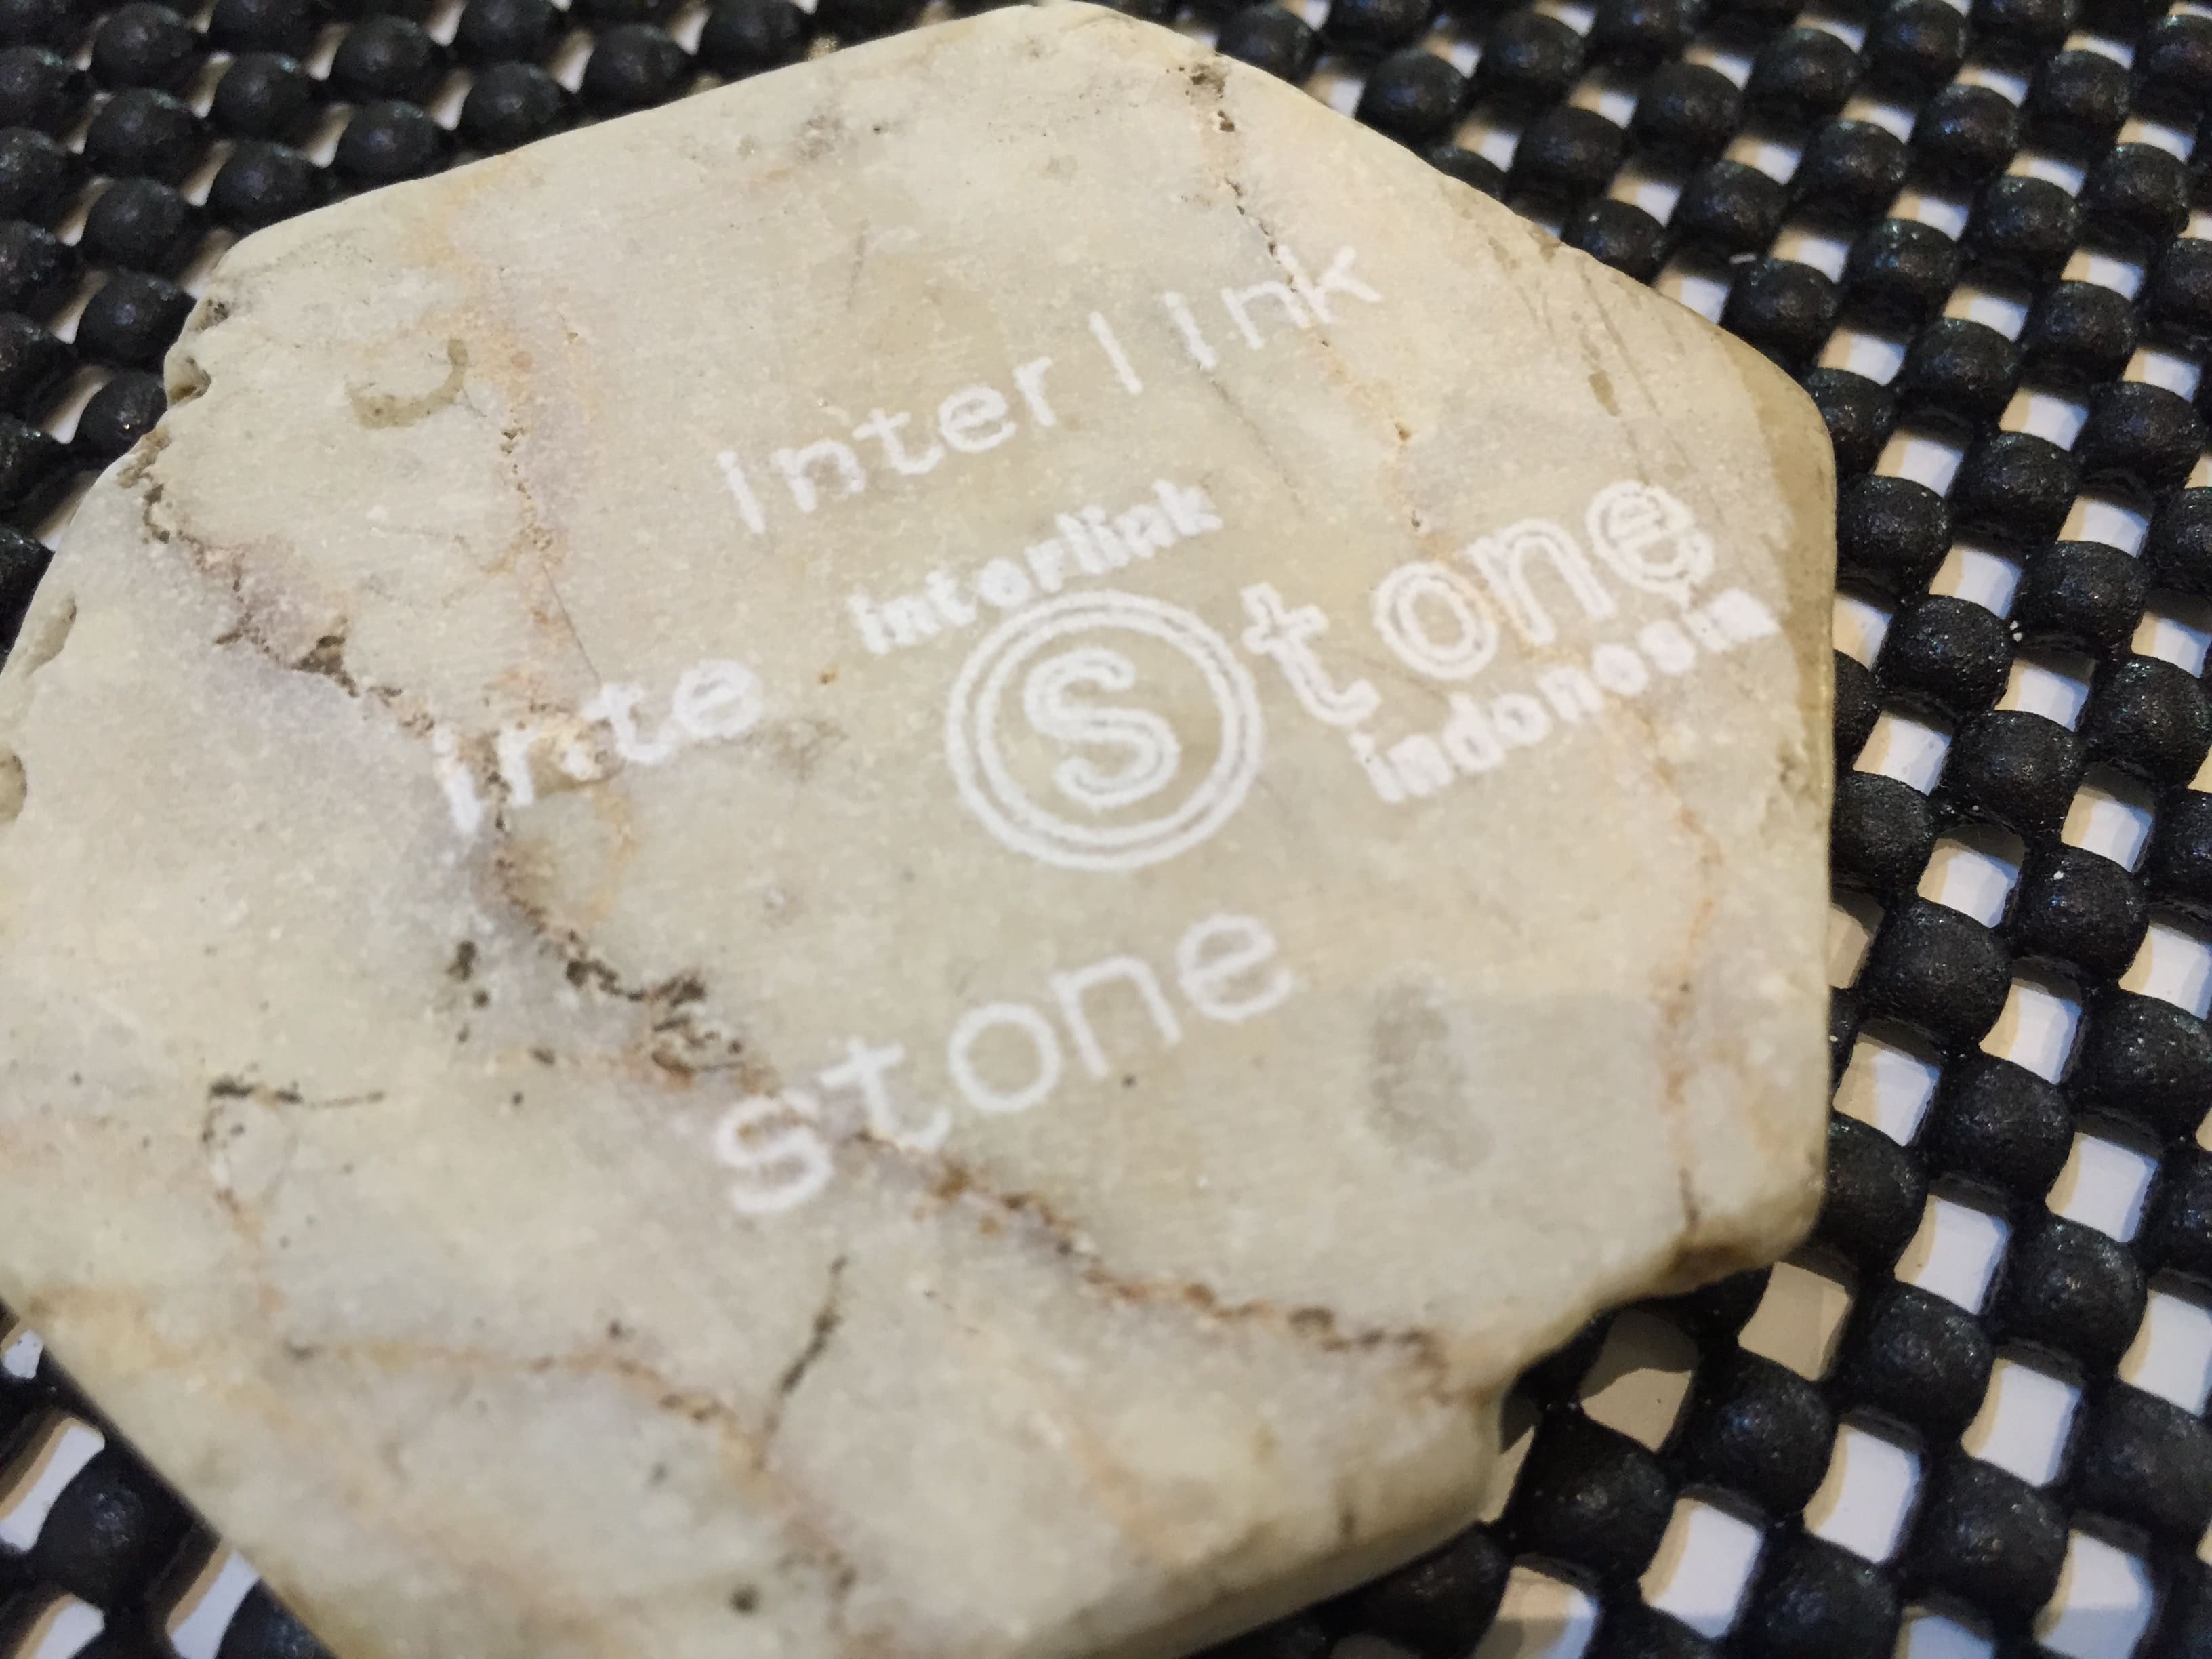 Image of stone engraved with text 'interlink stone indonesia' and logo